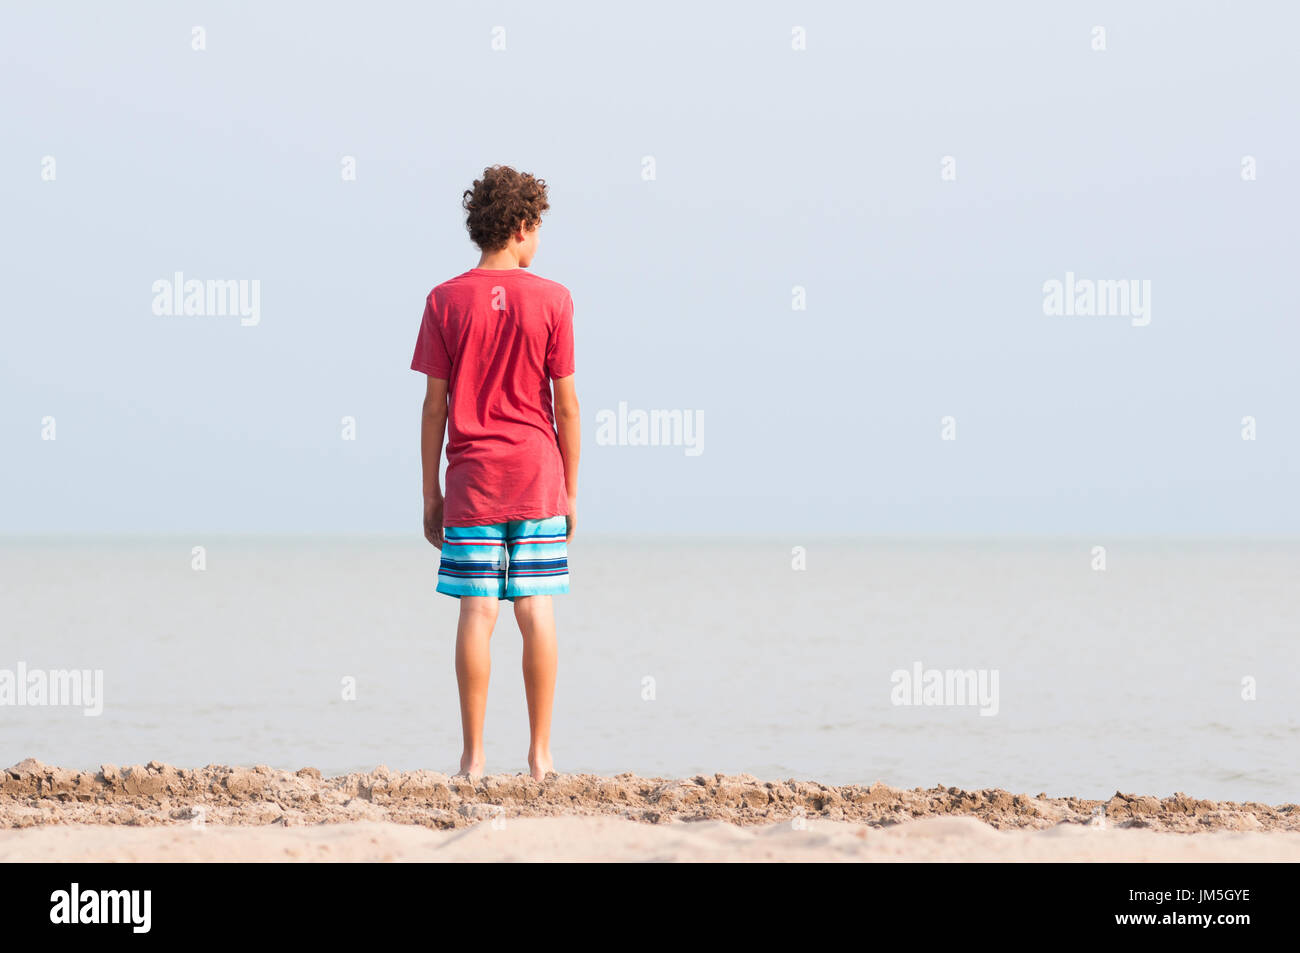 Thirteen year old boy standing on a beach looking out over a lake Stock Photo